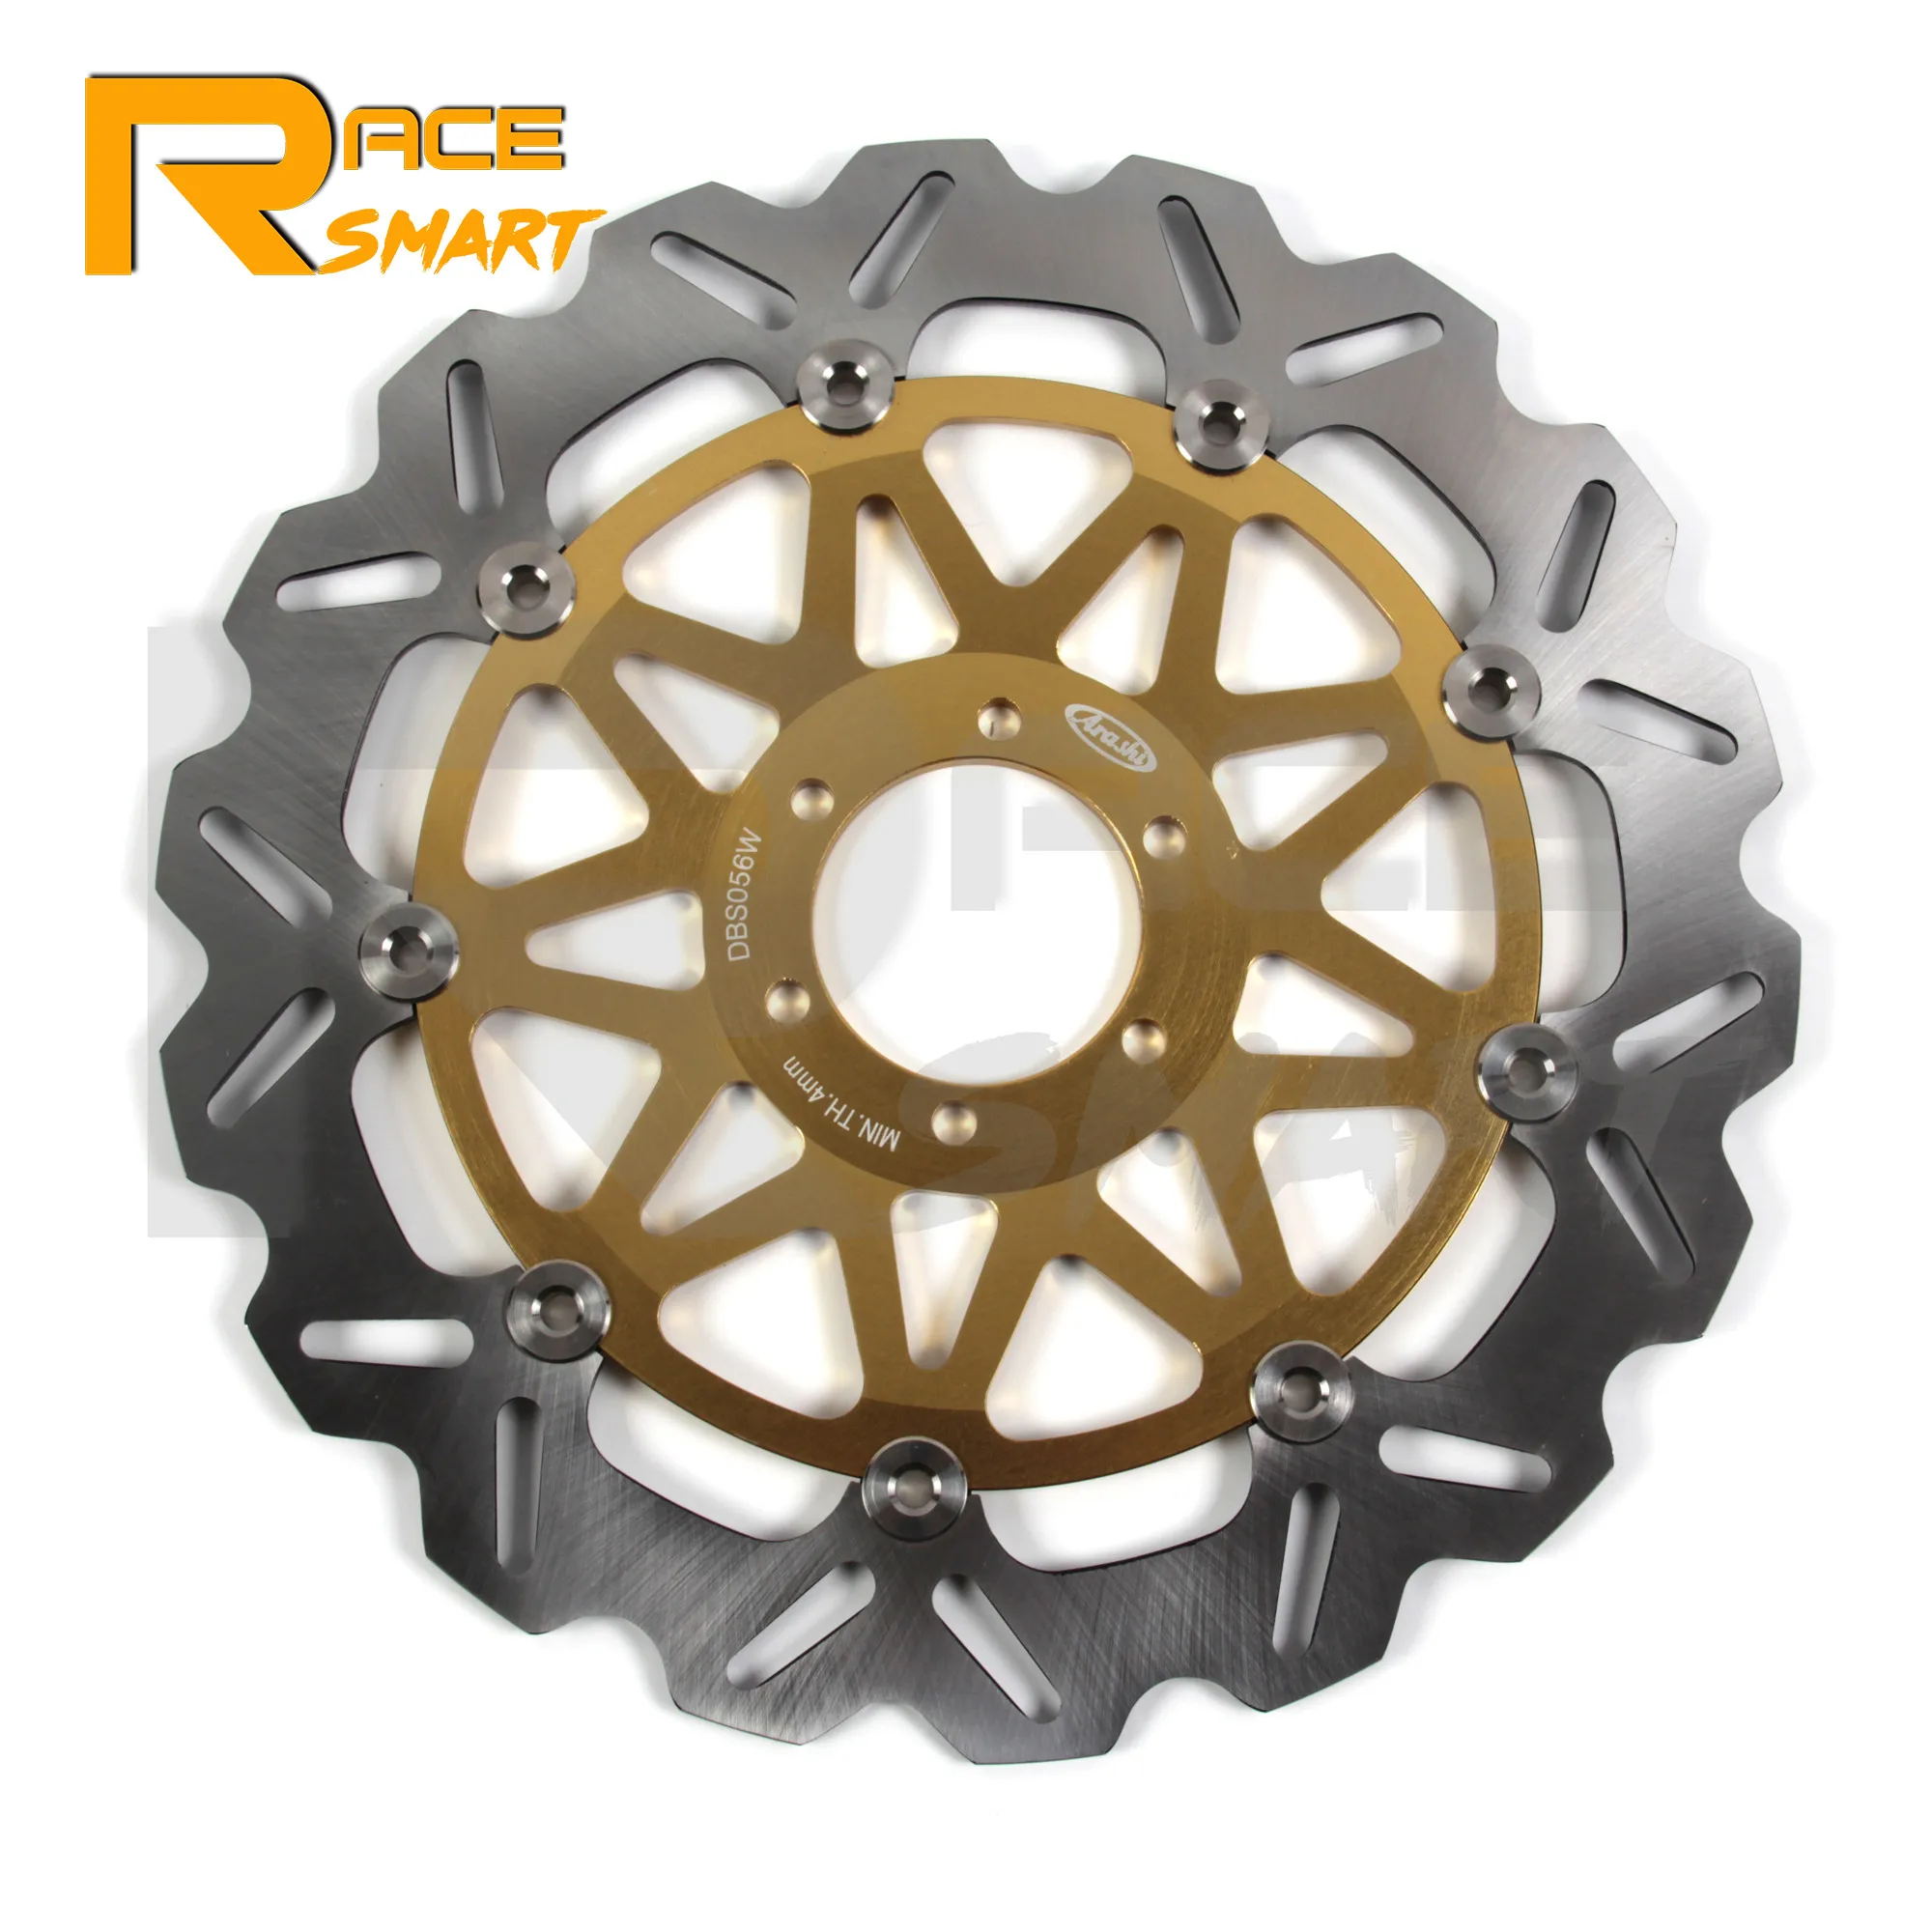 

Motorcycle CNC Front Brake Rotor For YAMAHA TZR 125 1989 - 1992 Brake Disc Disks Rotors TZR 250 1989 - 1992 TZR125 250 1990 1991